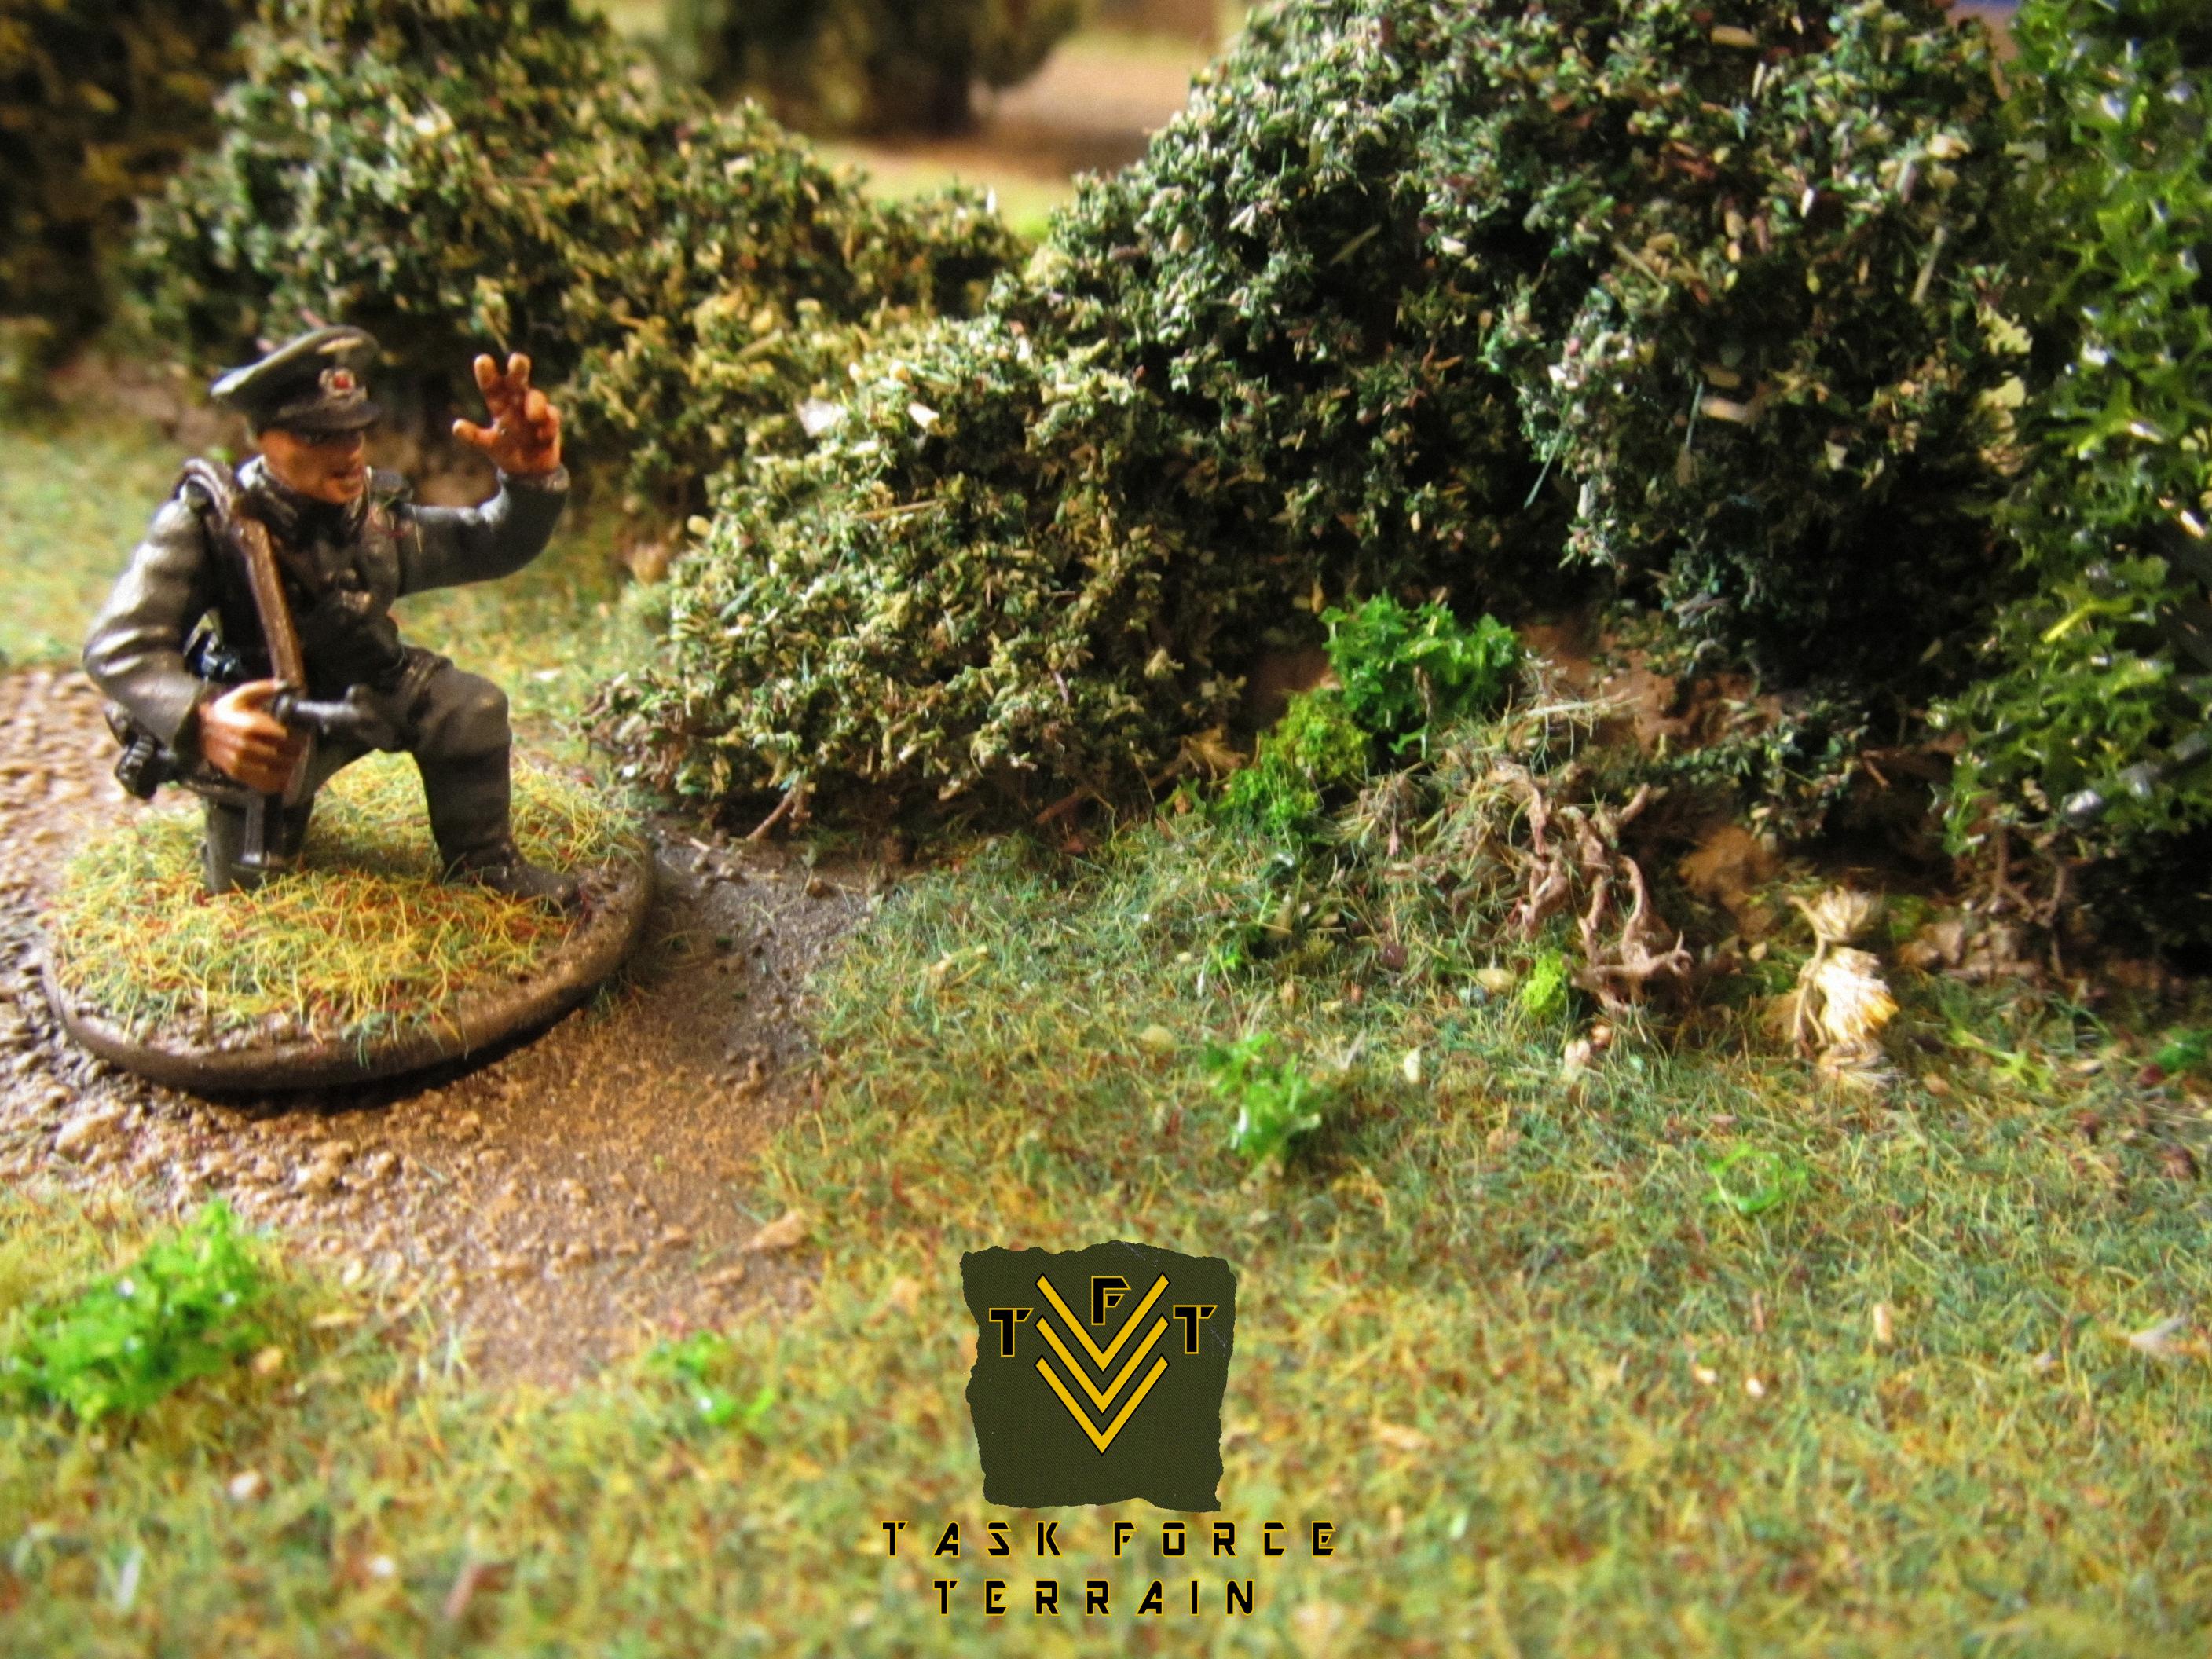 28mm Ww2, Bocage, Bolt Action Scenery, Bolt Action Table, Boltaction, Buildings, Terrain, World War 2, Ww2 Gaming Table, Ww2 Scenery, Ww2 Terrain